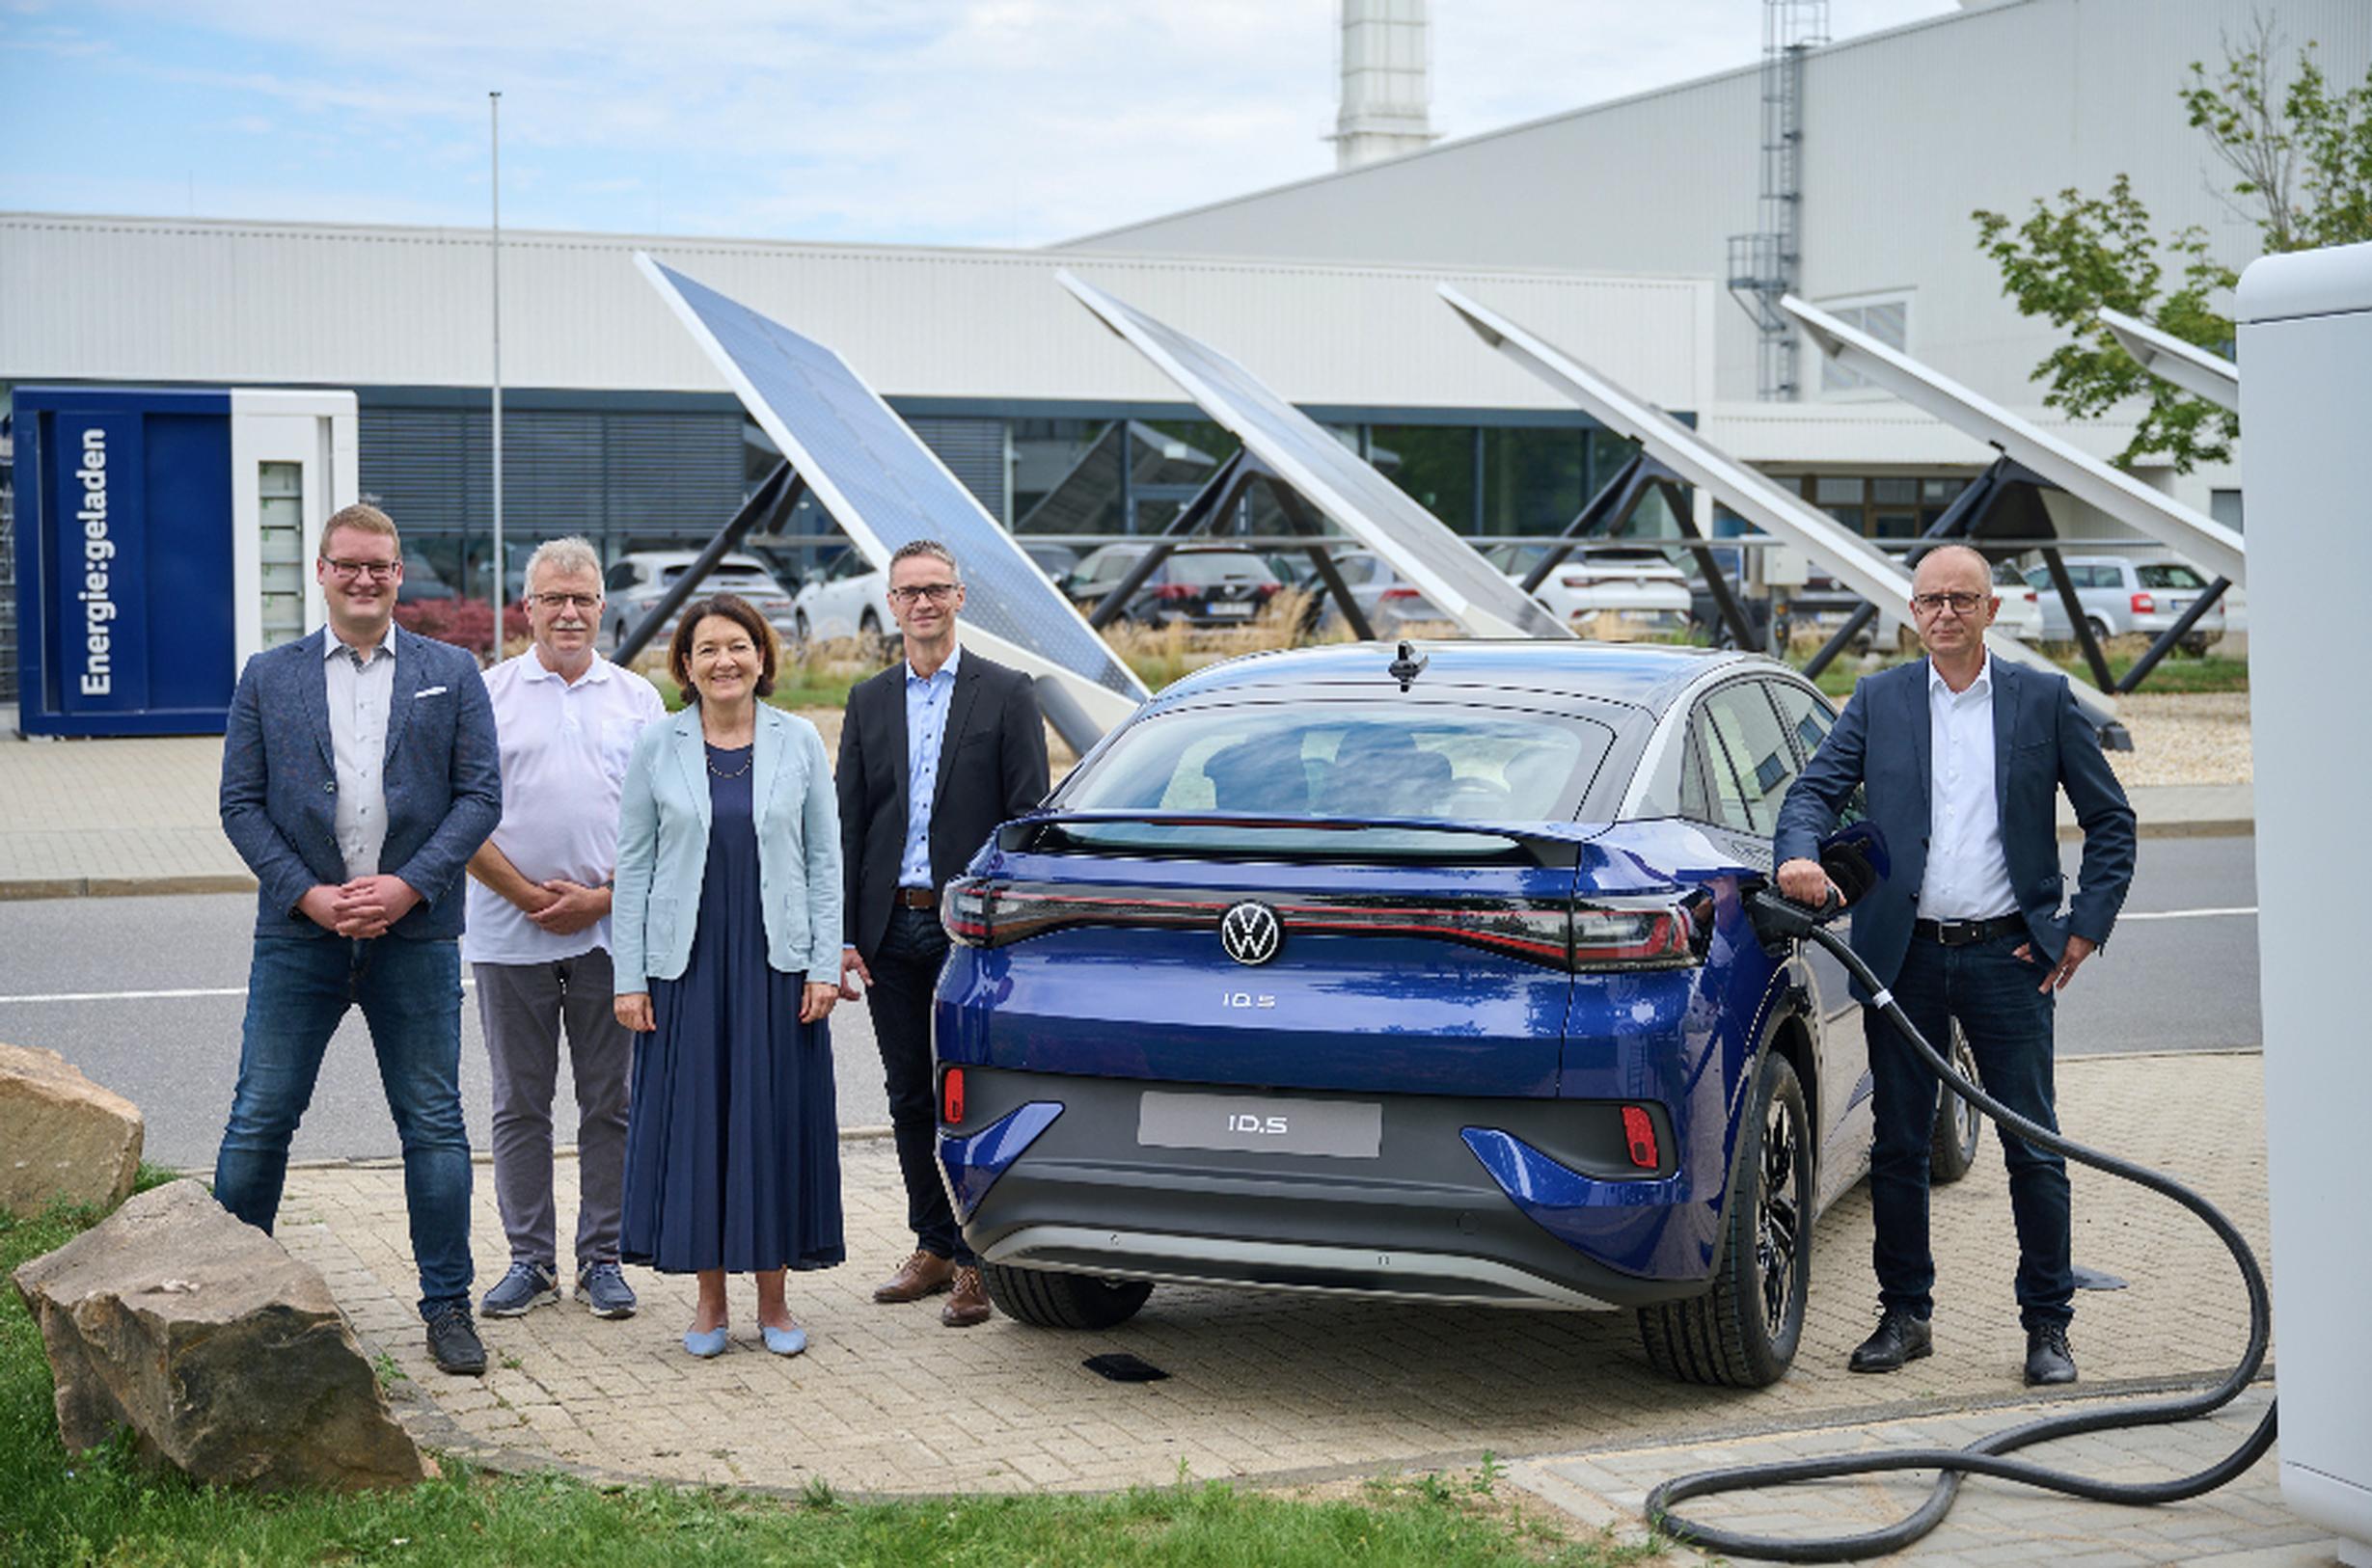 The high-power-charging park with new automotive powerbank in the background is open (from left): Florian Köhler, project manager AW Automotive, Ingolf Keller, energy officer, Karen Kutzner, managing director finance and controlling VW Saxony, Lars Thielemann, head of planning and Jörg Engelmann, head of innovation